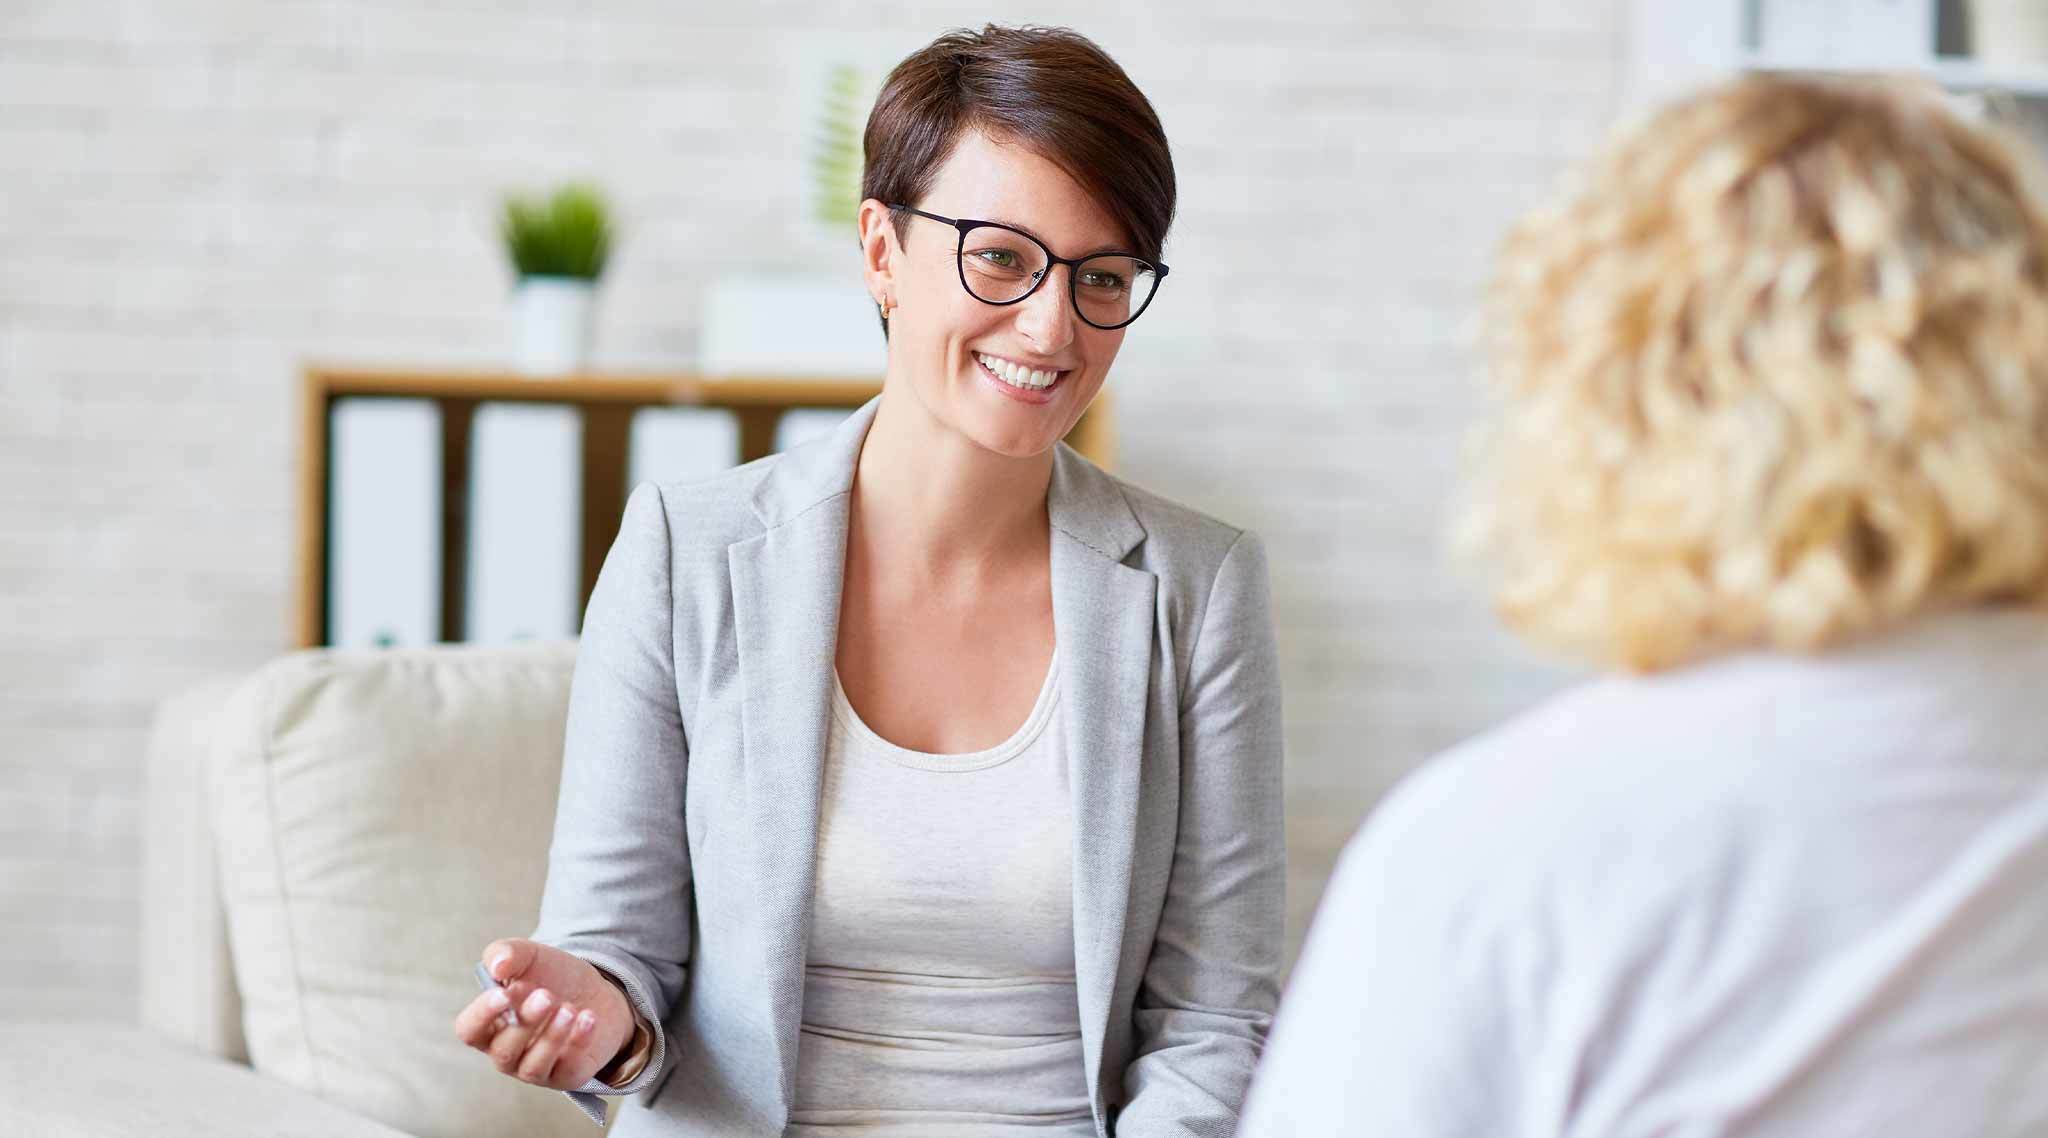 Women interviewing another person in an white modern office setting.